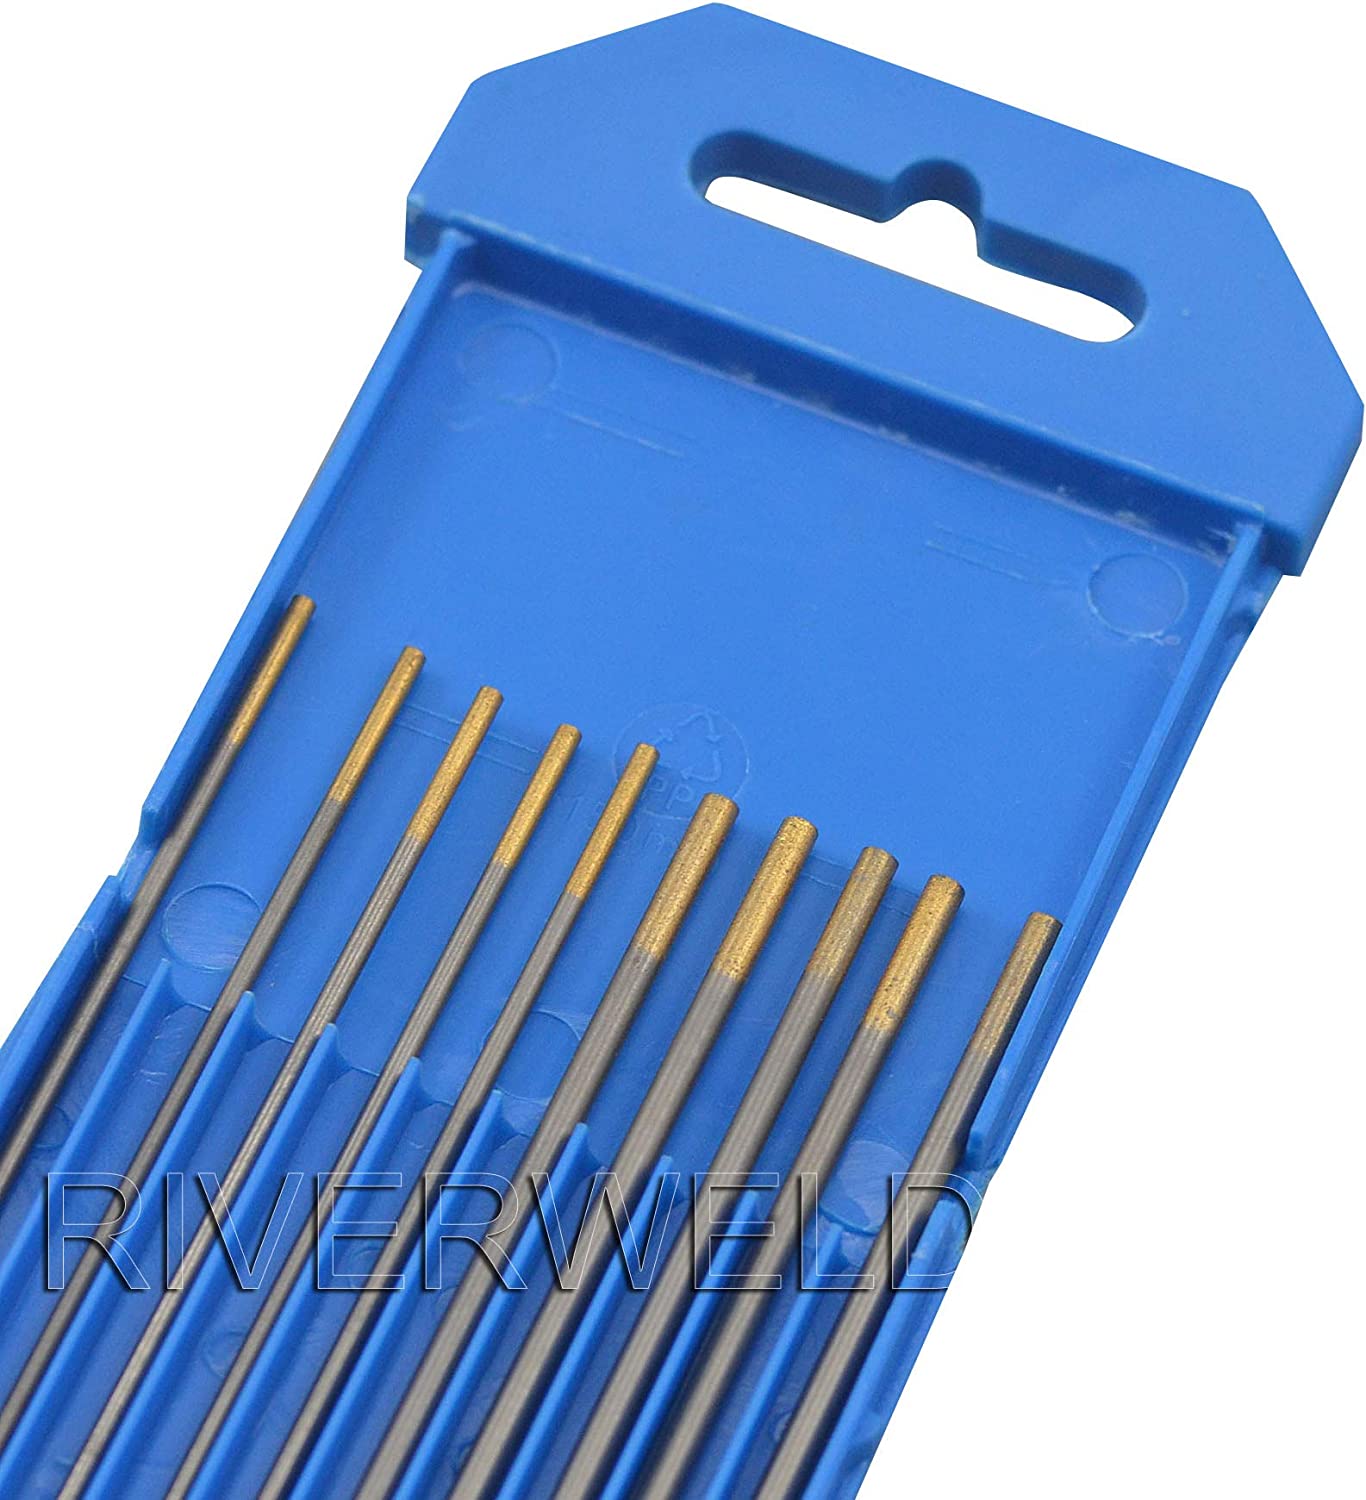 1.5 Percent Lanthanated TIG Tungsten Electrode WL15 Gold Assorted Size 10PCS 